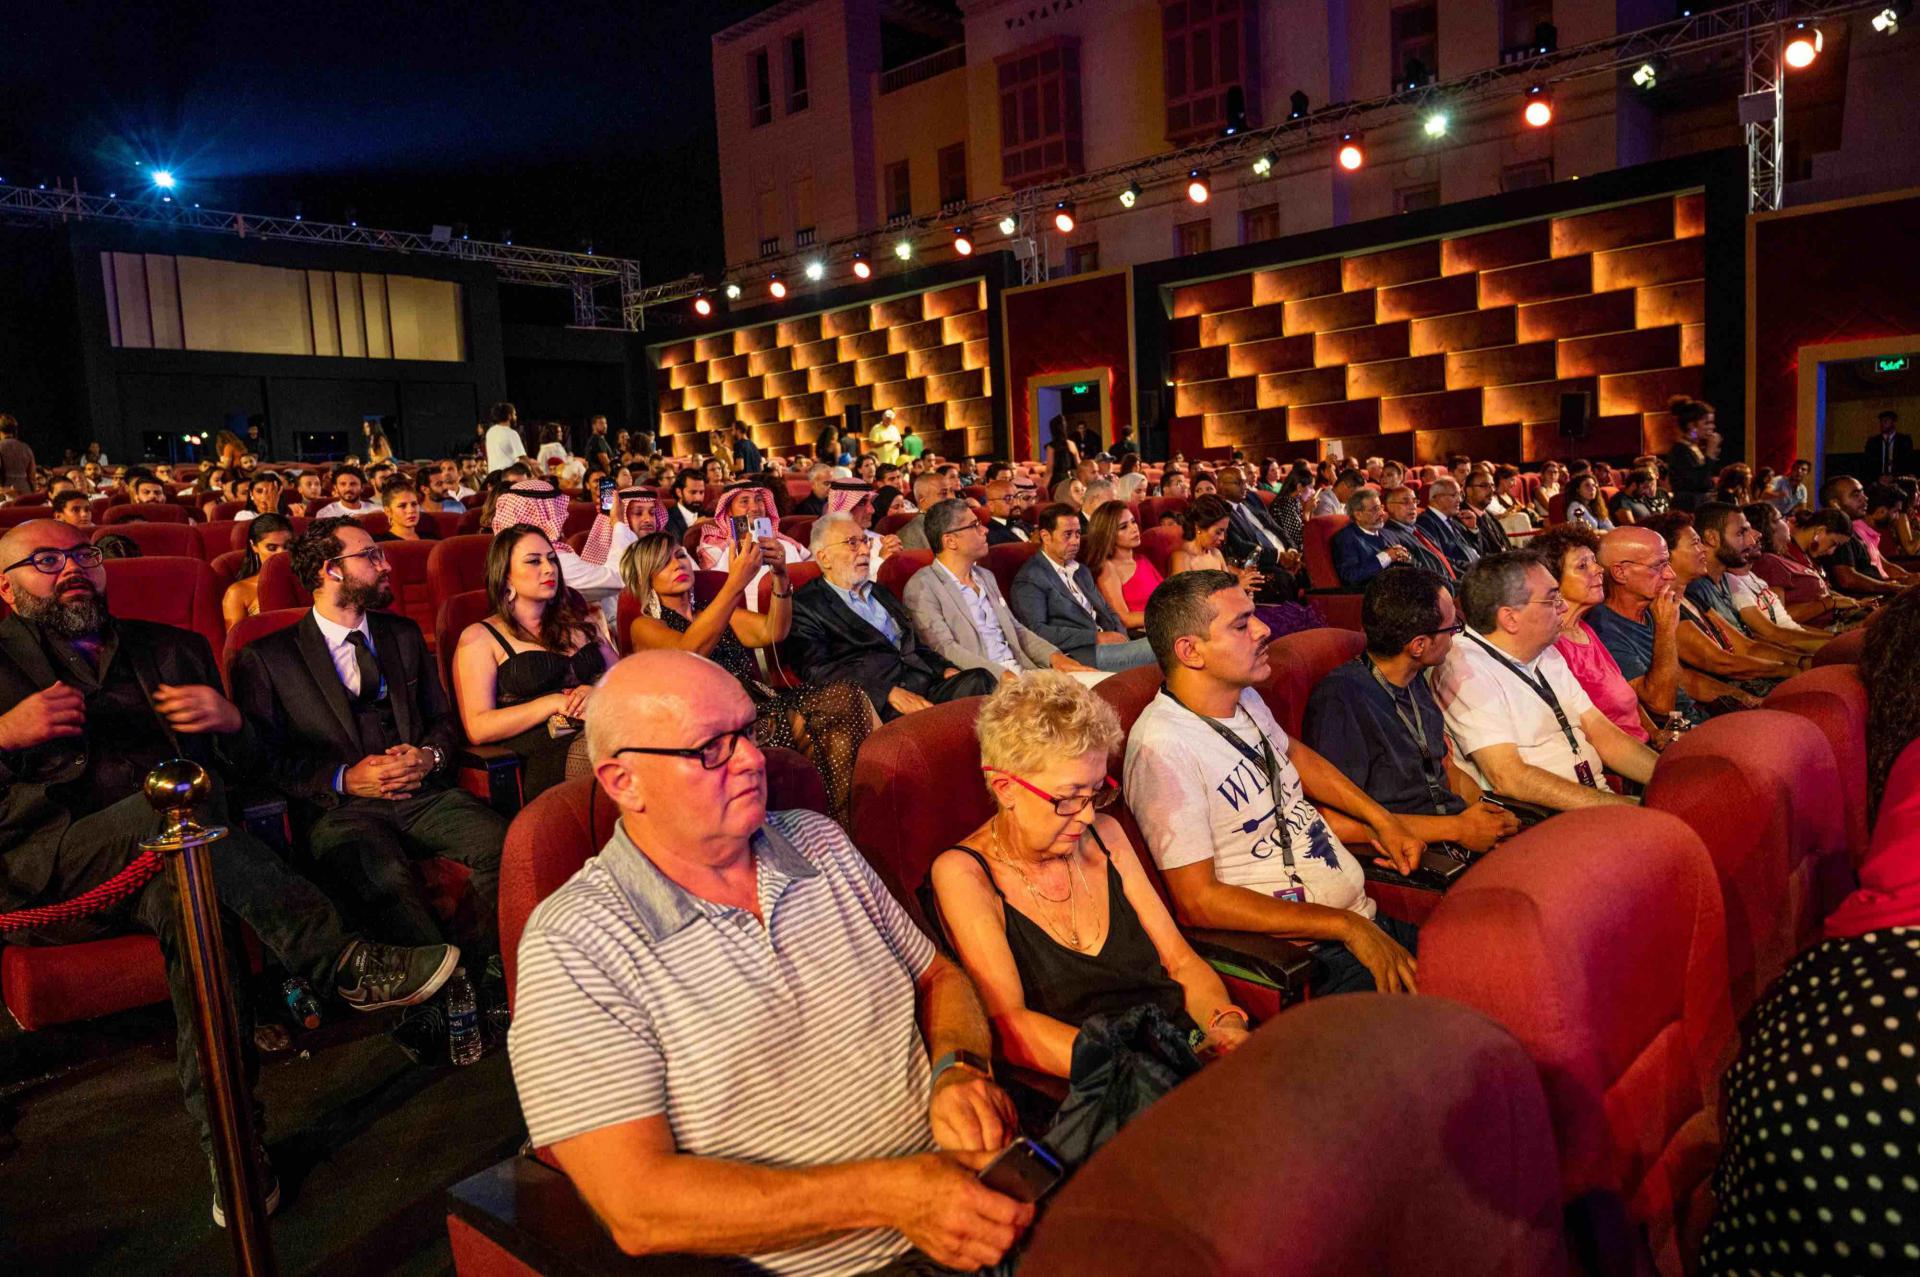 The general public attend the screening of the movie The Knight and the Princess as part of 3rd edition of ElGouna Film Festival, at Marina Theatre, in ElGouna, Egypt